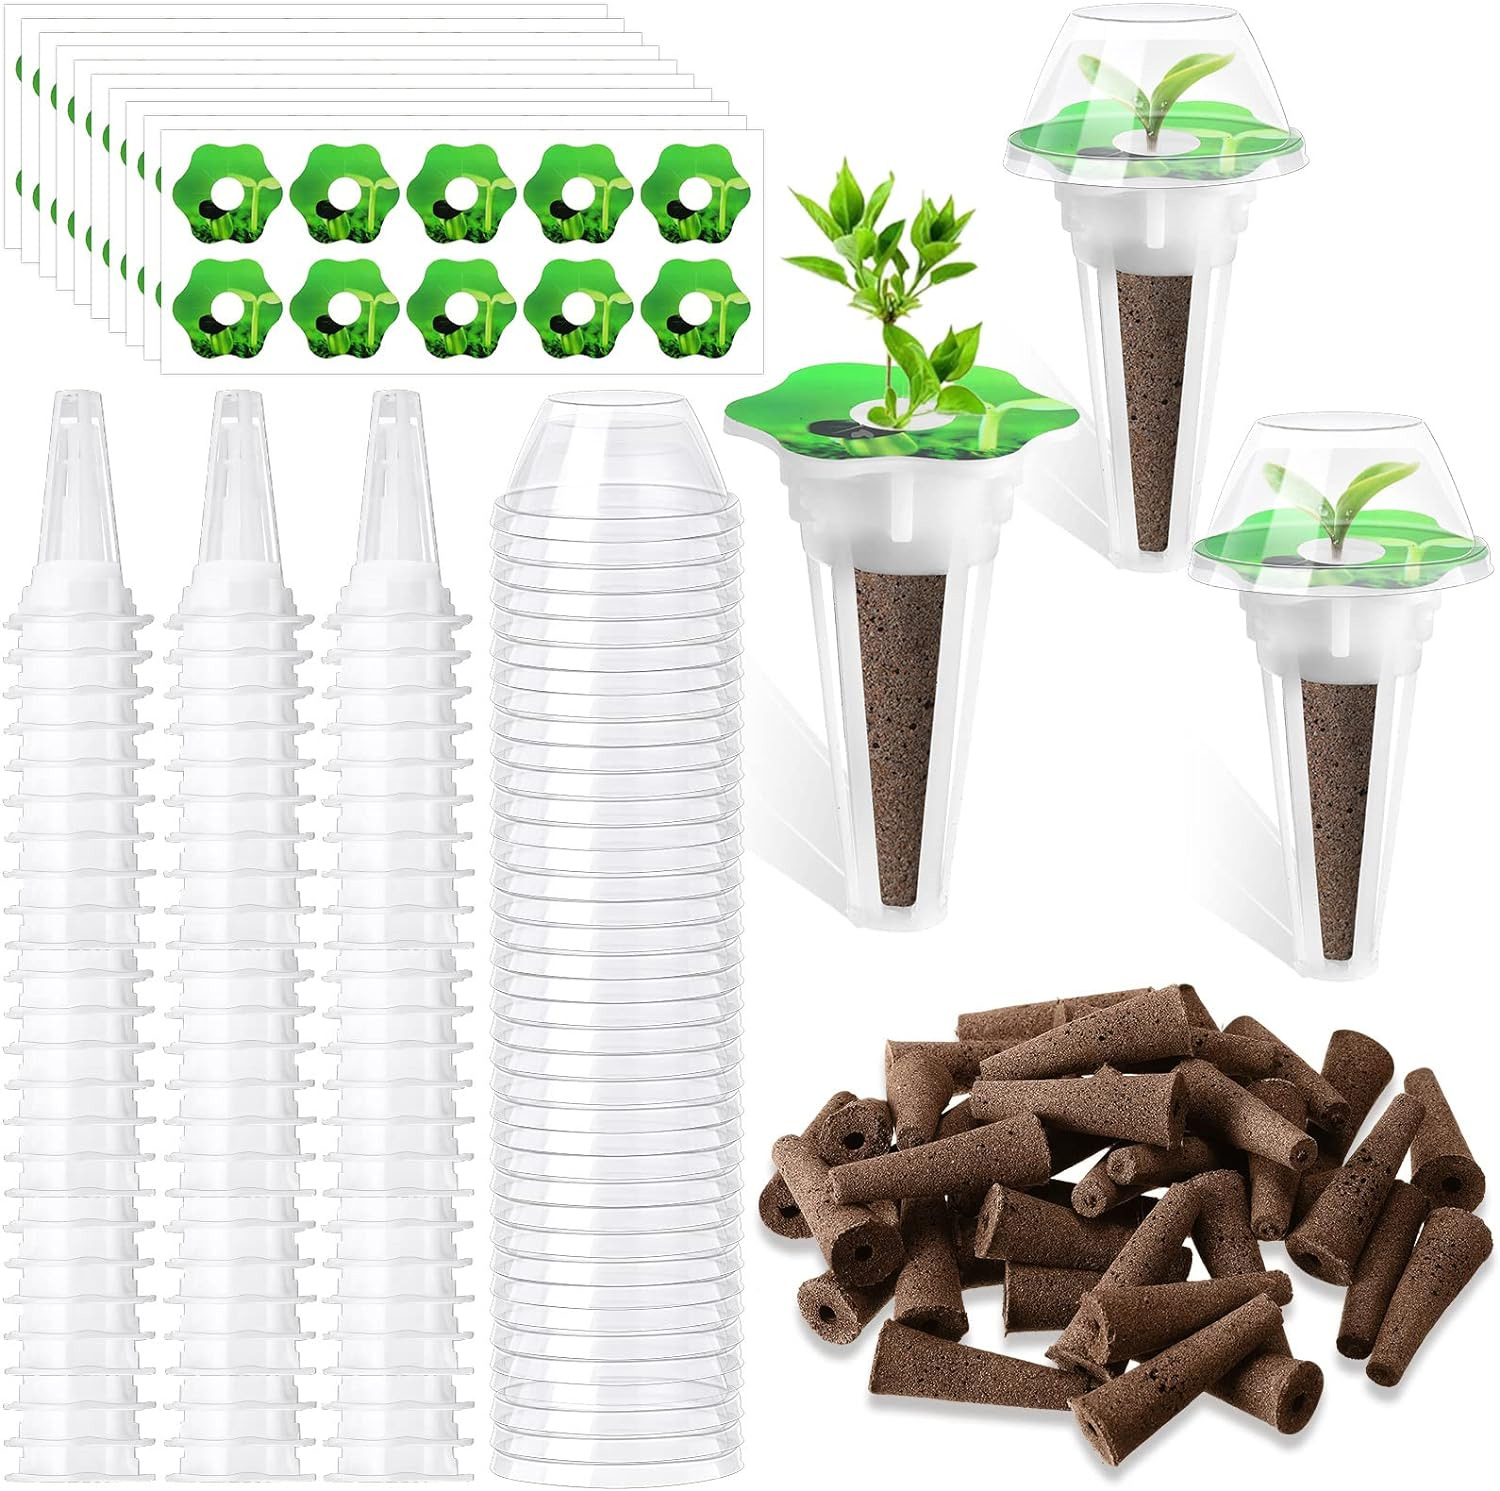 400 Pcs Hydroponic Growing Kit Include Replacement Grow Baskets Plant Grow Sp...